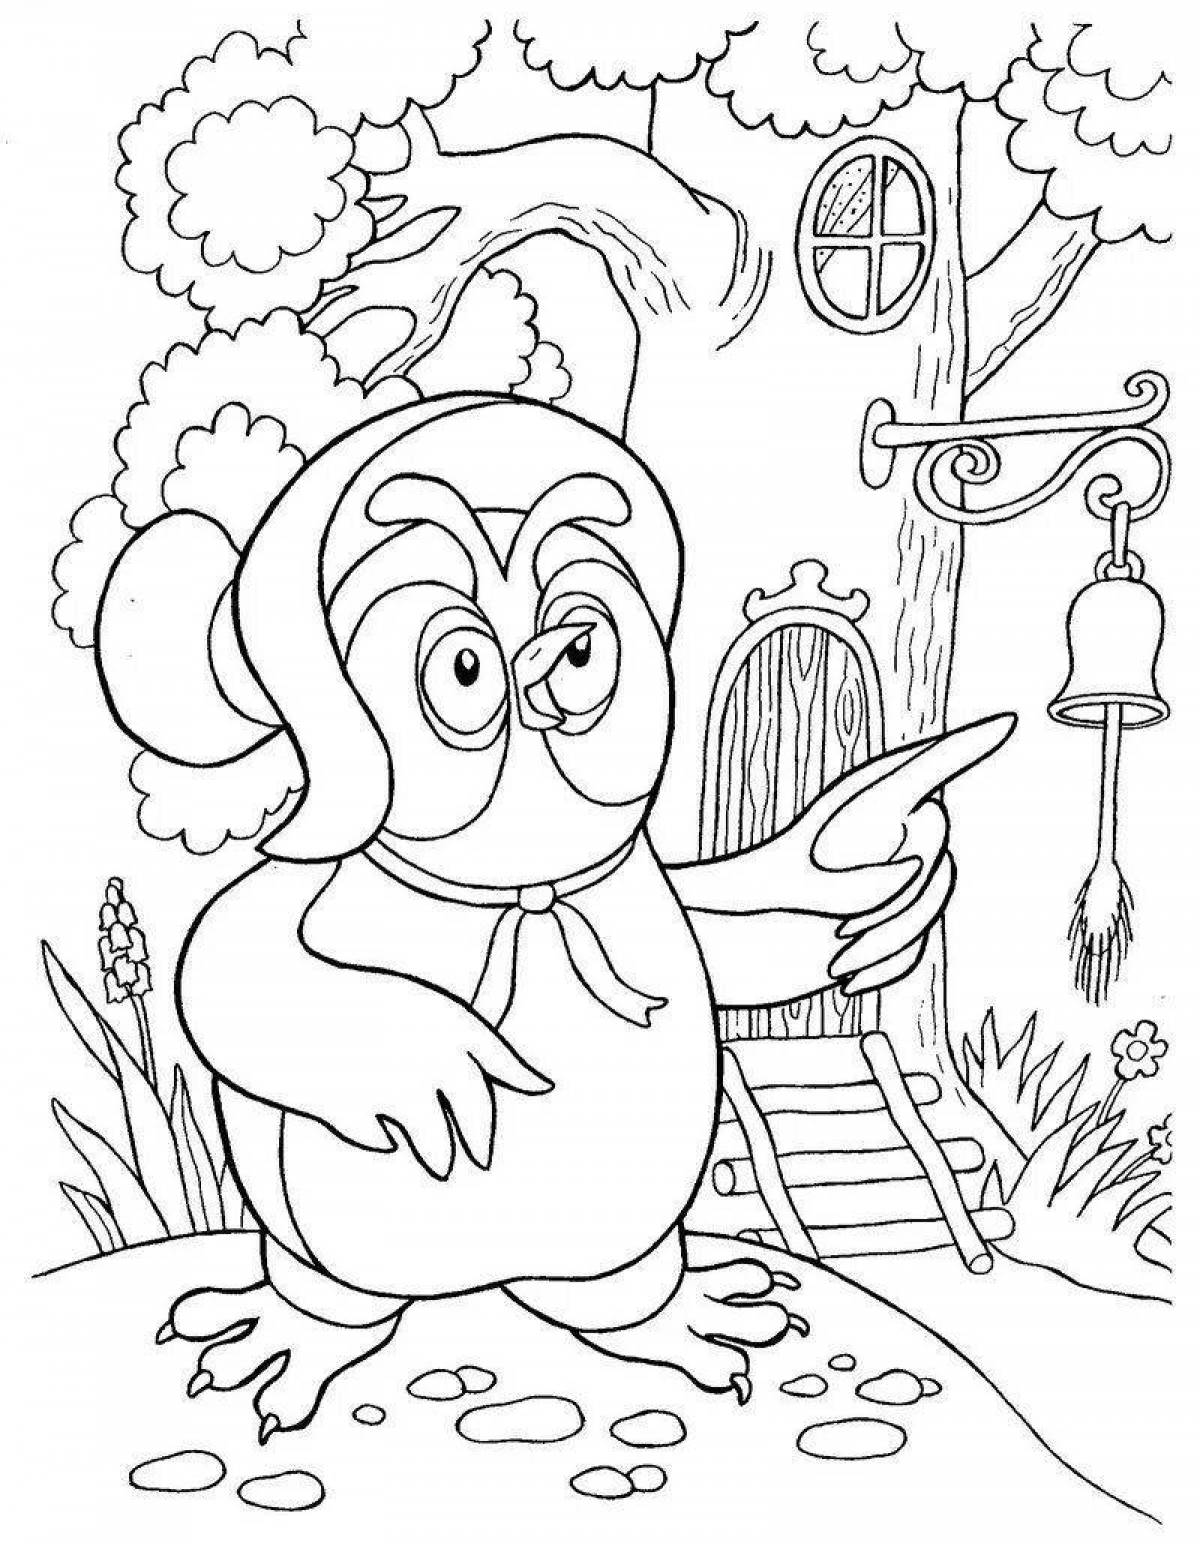 Winnie the pooh owl mystical coloring book